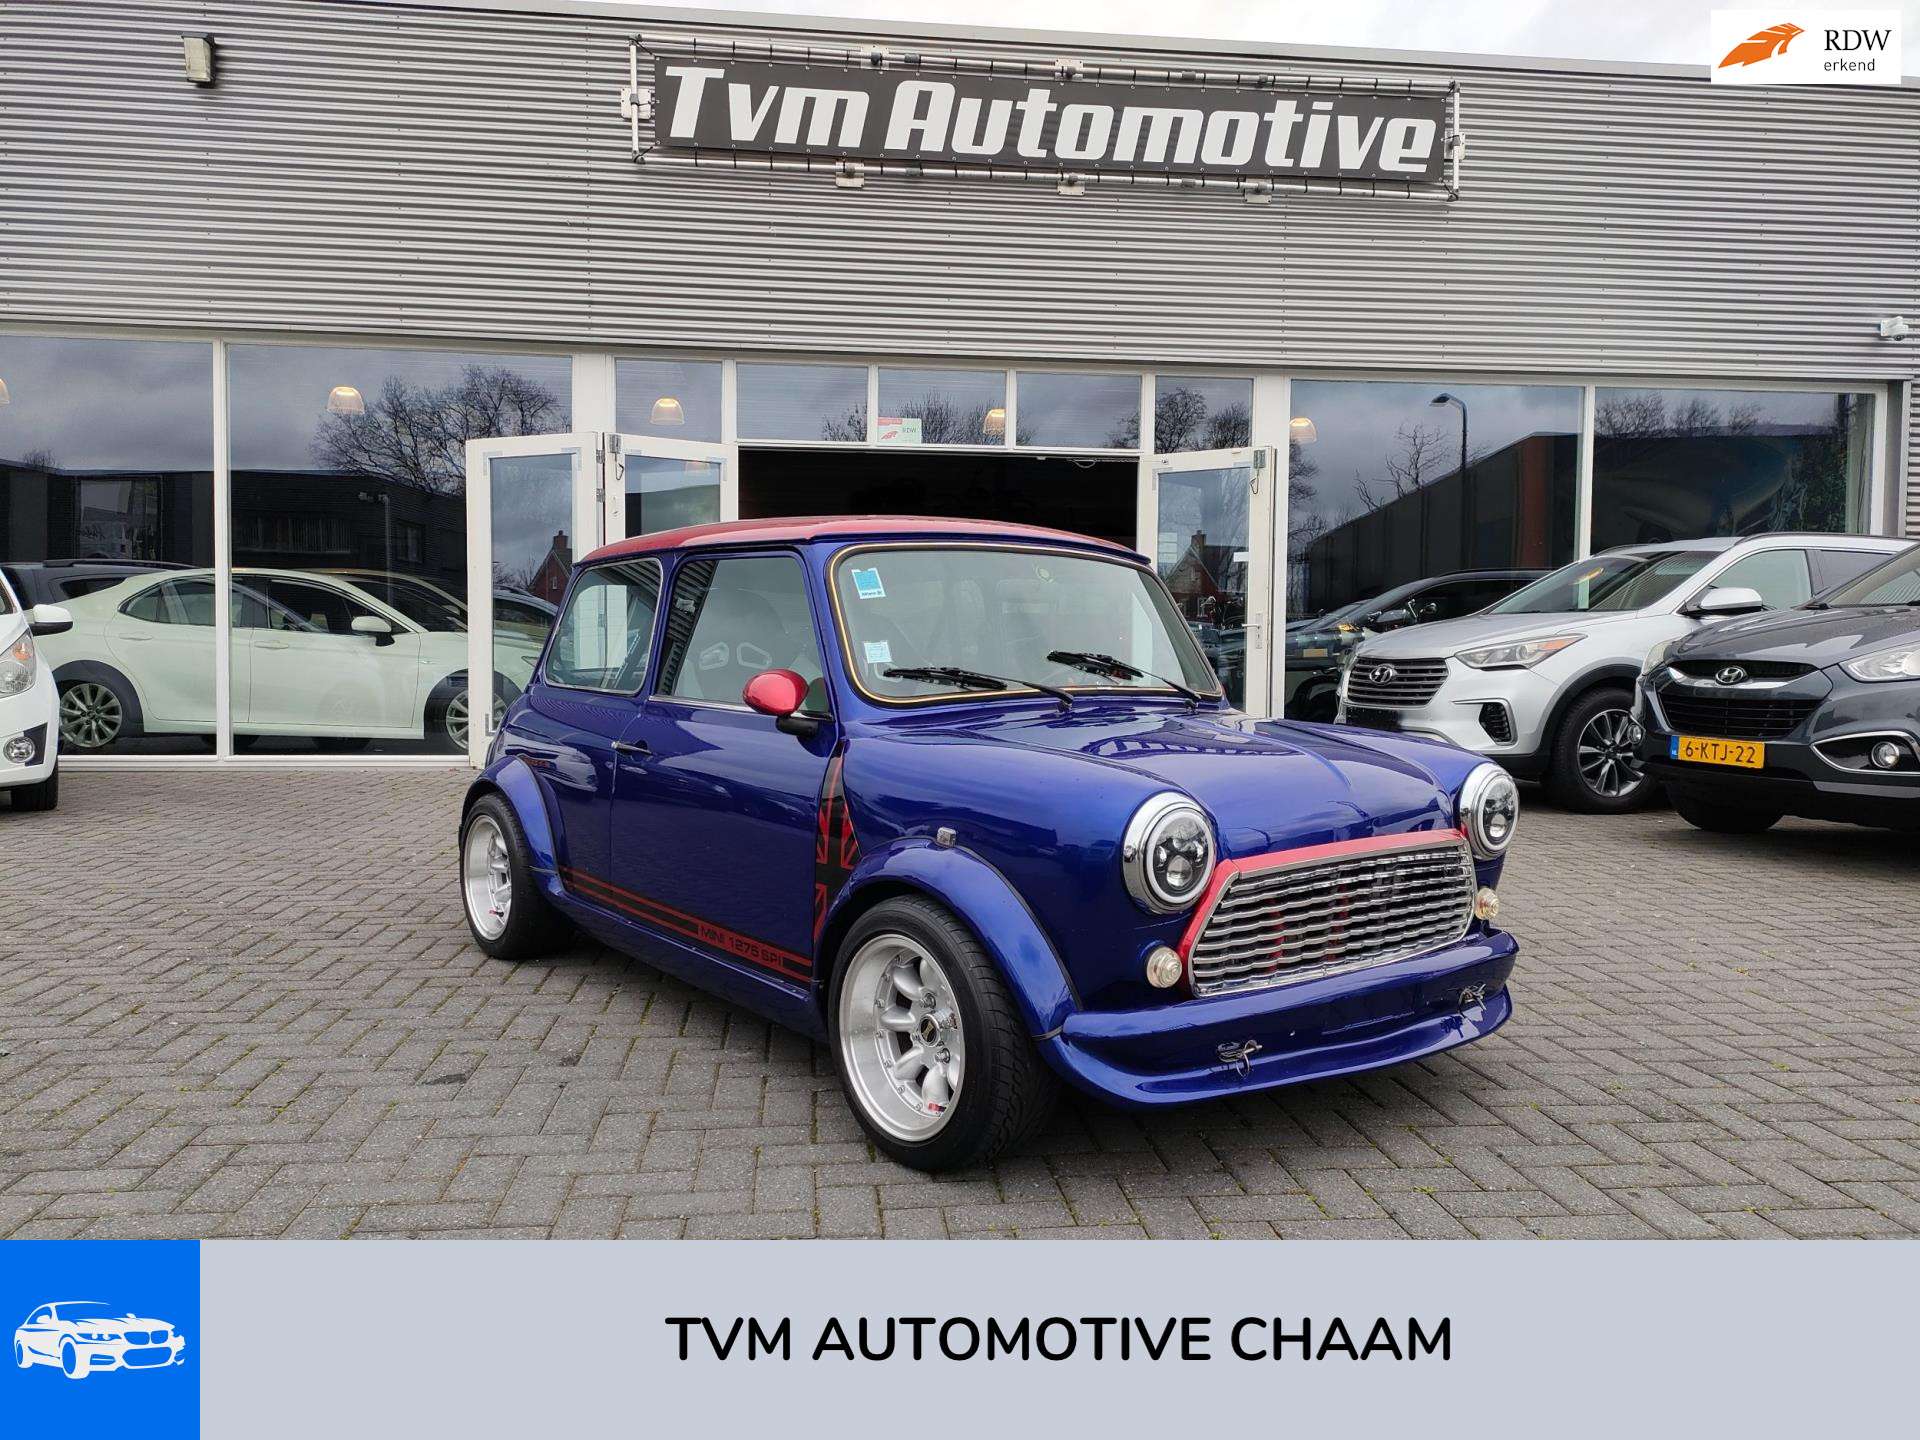 Rover MINI Sedan in Blue used in Chaam for € 16,940.-